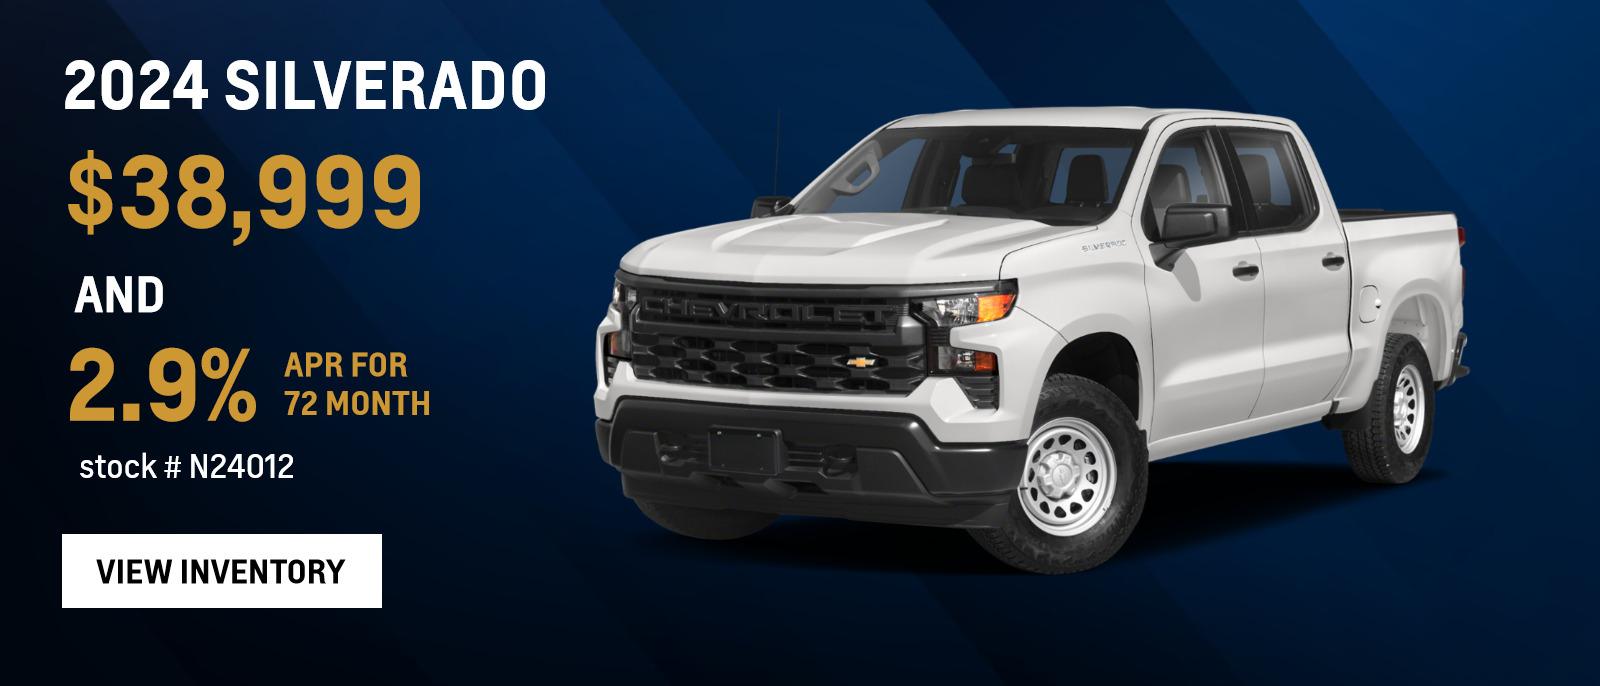 2024 Silverado
$38,999 and 2.9% for 72 month
stock # N24012